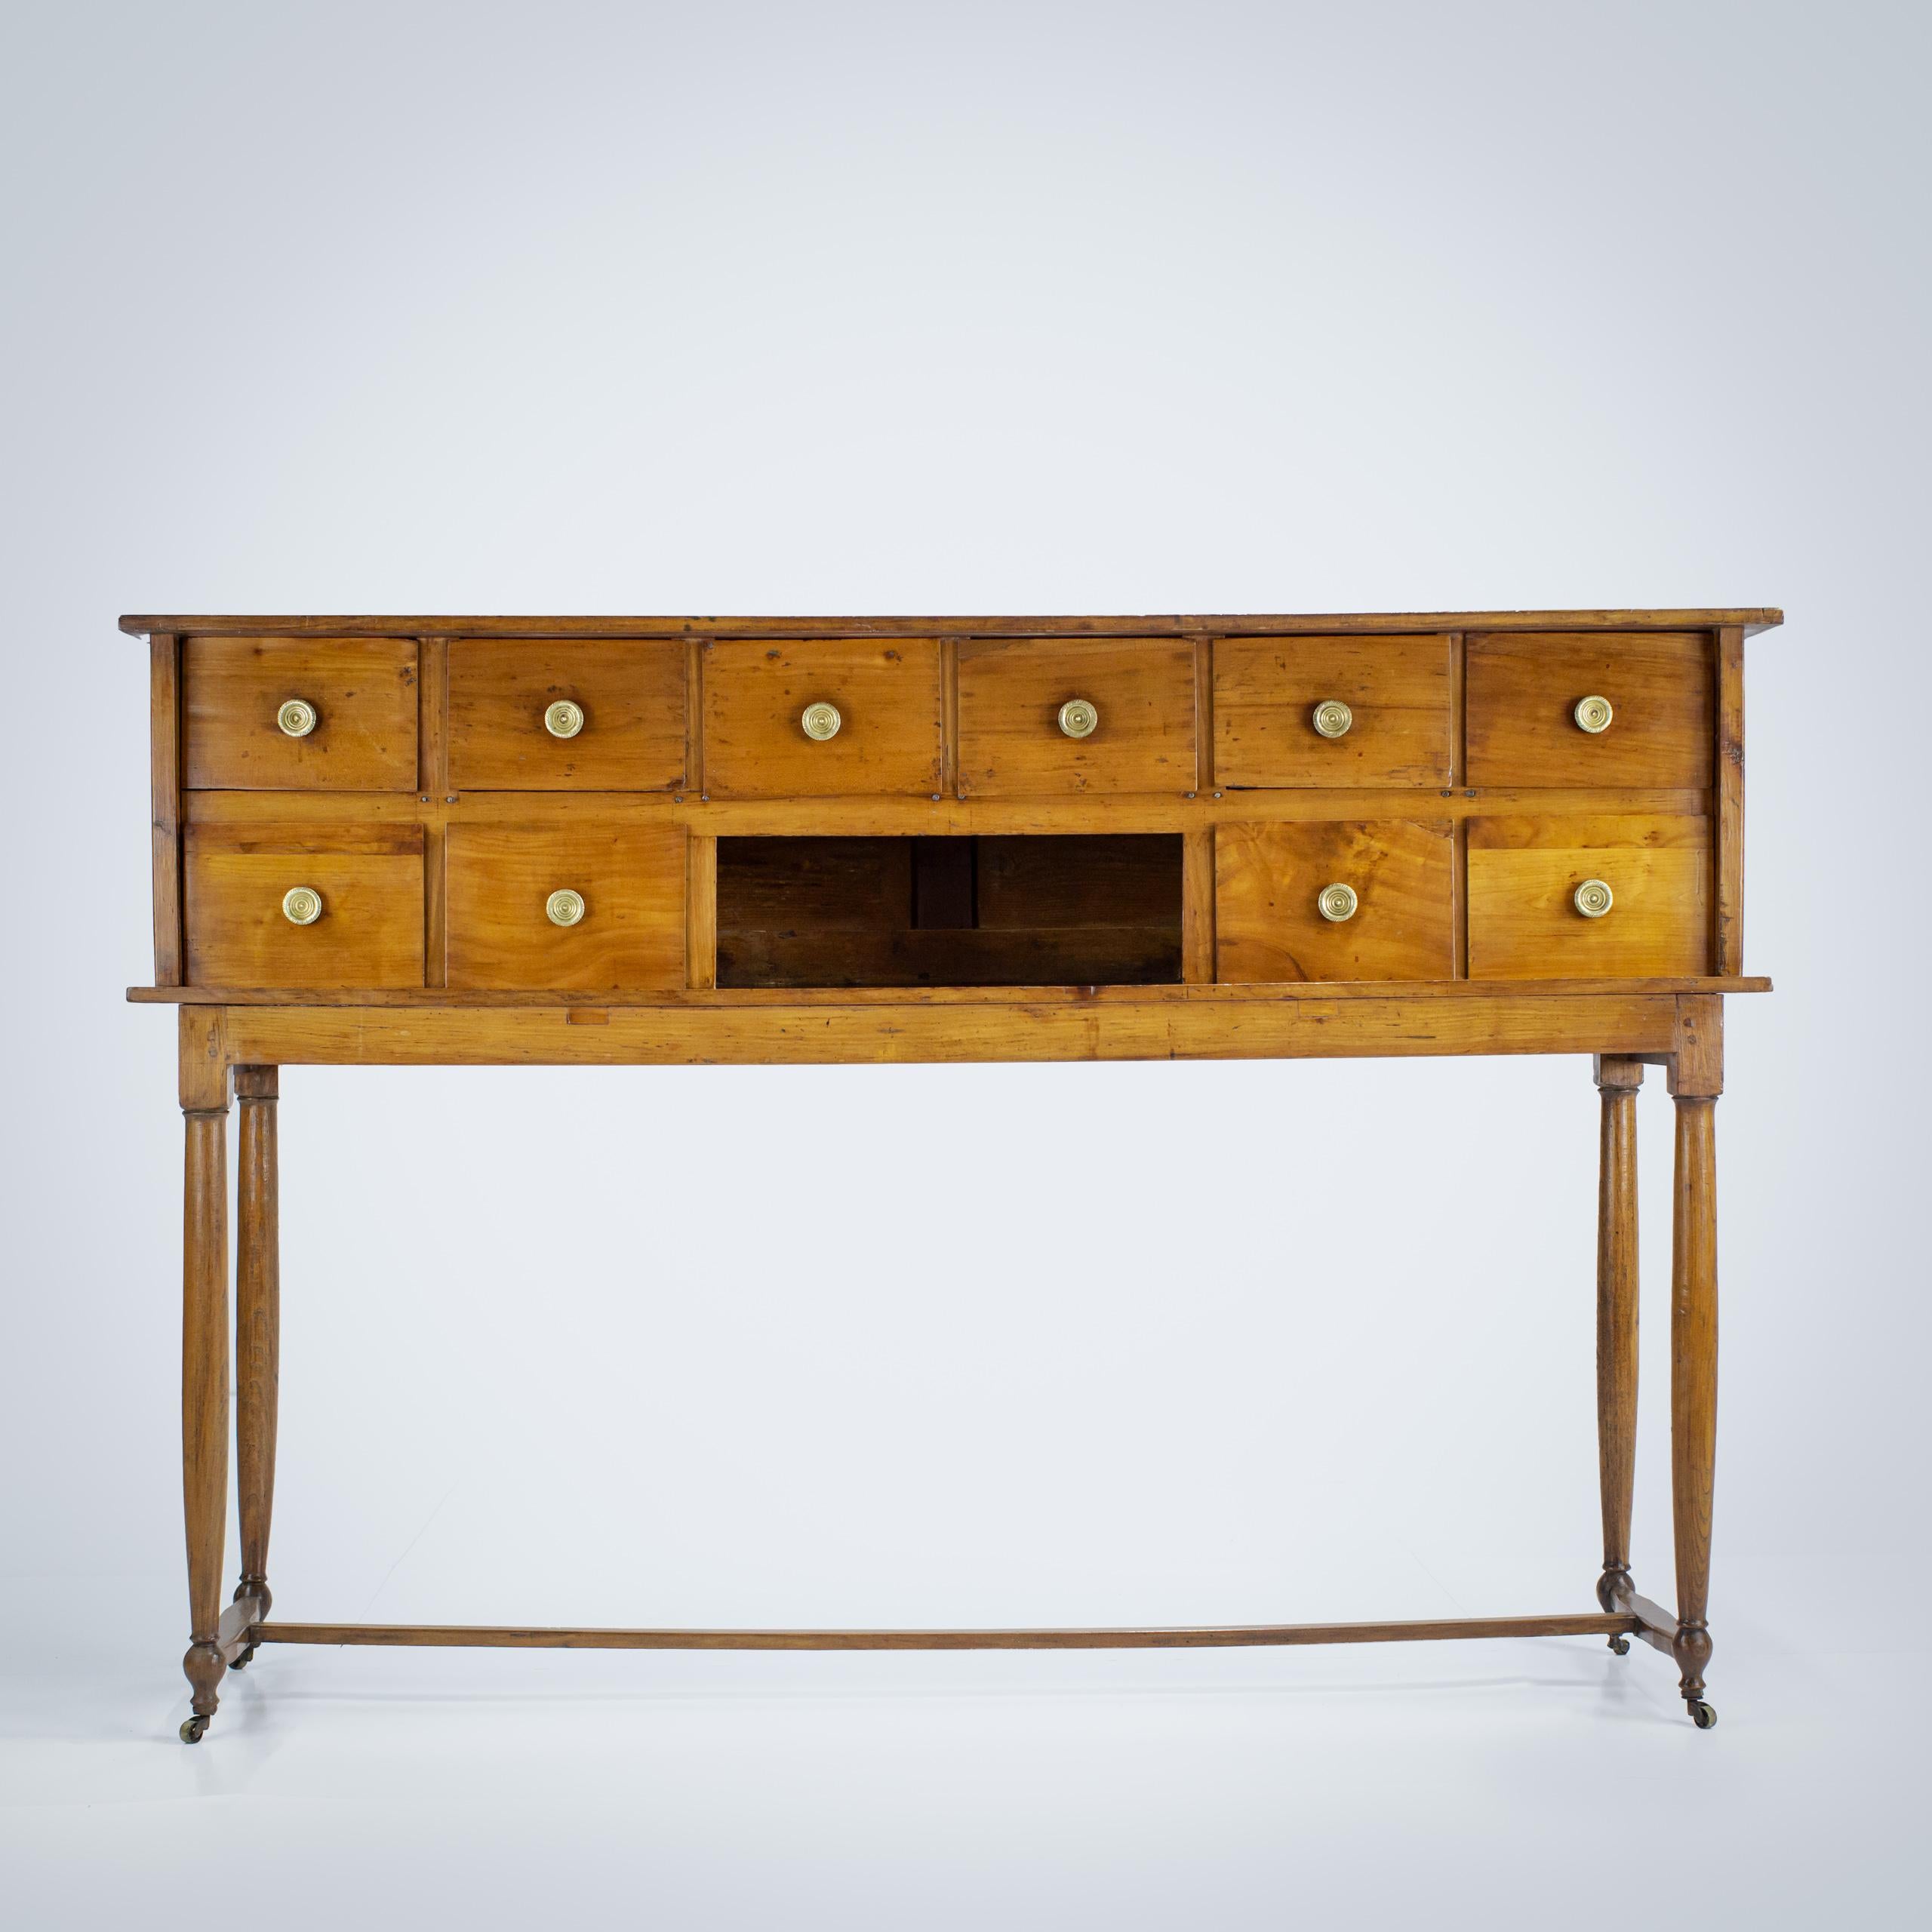 Early 19th Century Provincial Console with 10 Drawers. Beautifully delicate legs and stretcher, standing on castors, eminently useful hallway console. Cherrywood France Circa 1820.